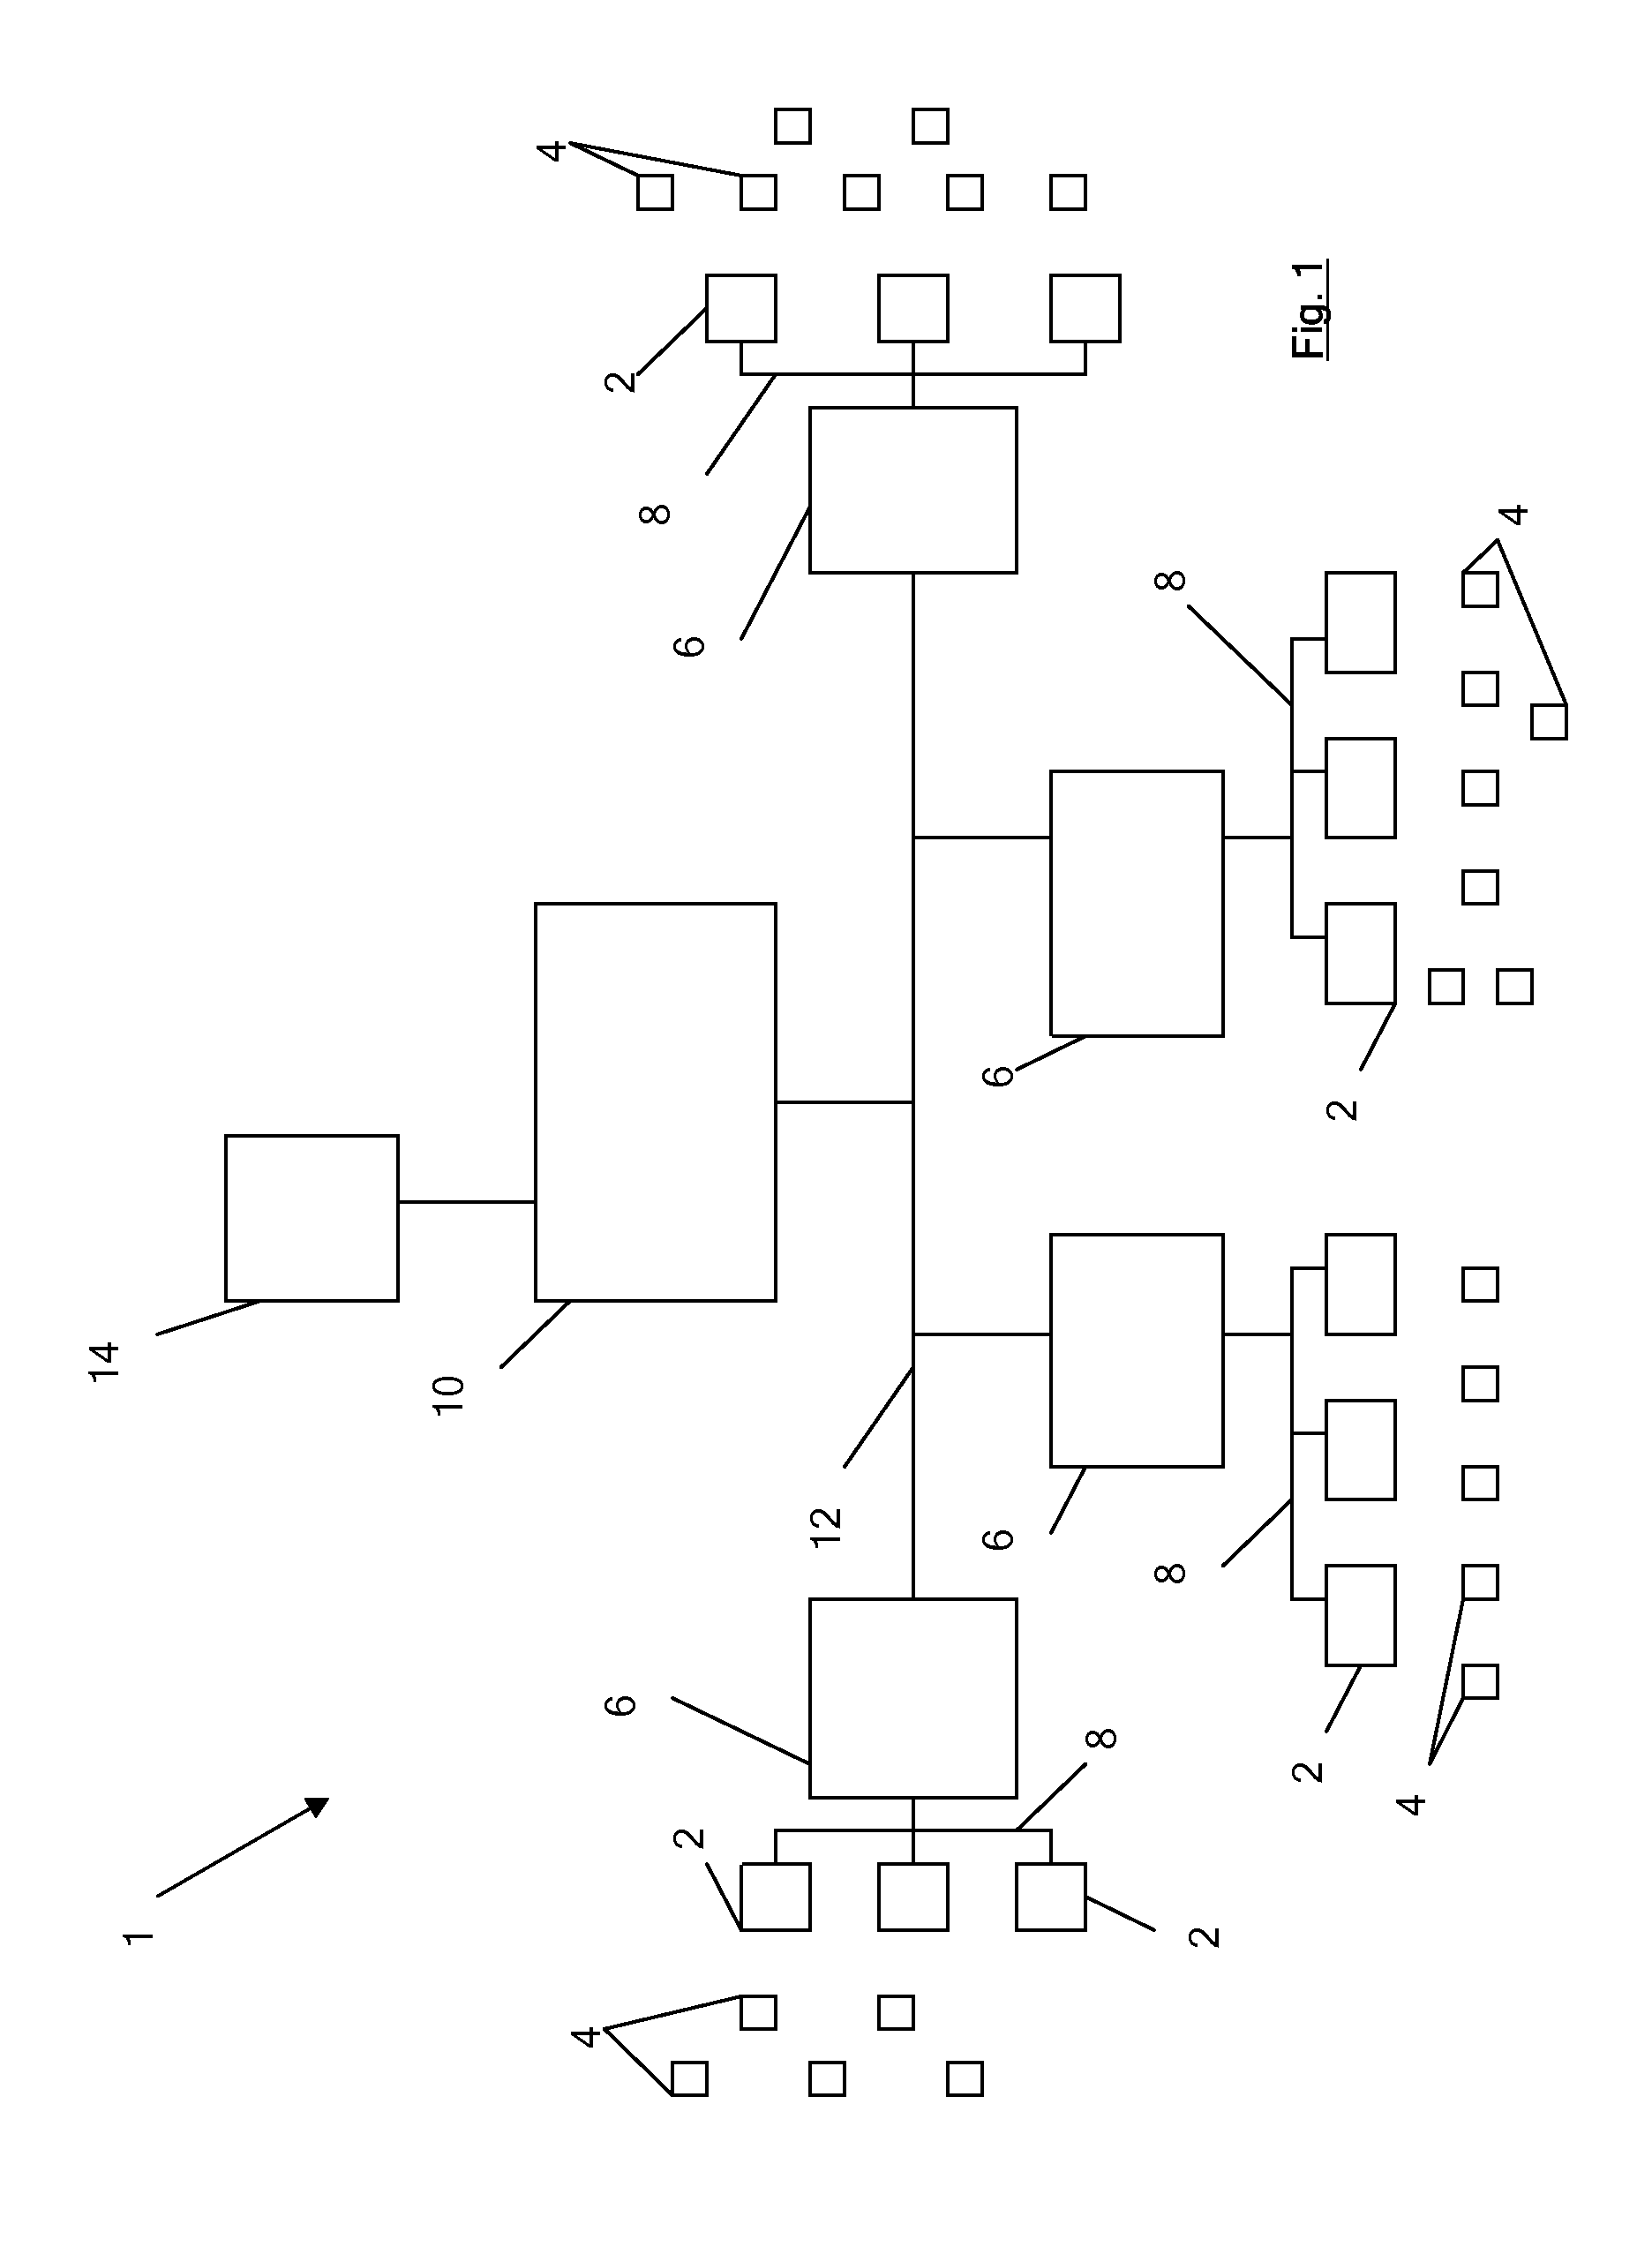 Event processing apparatus and methods